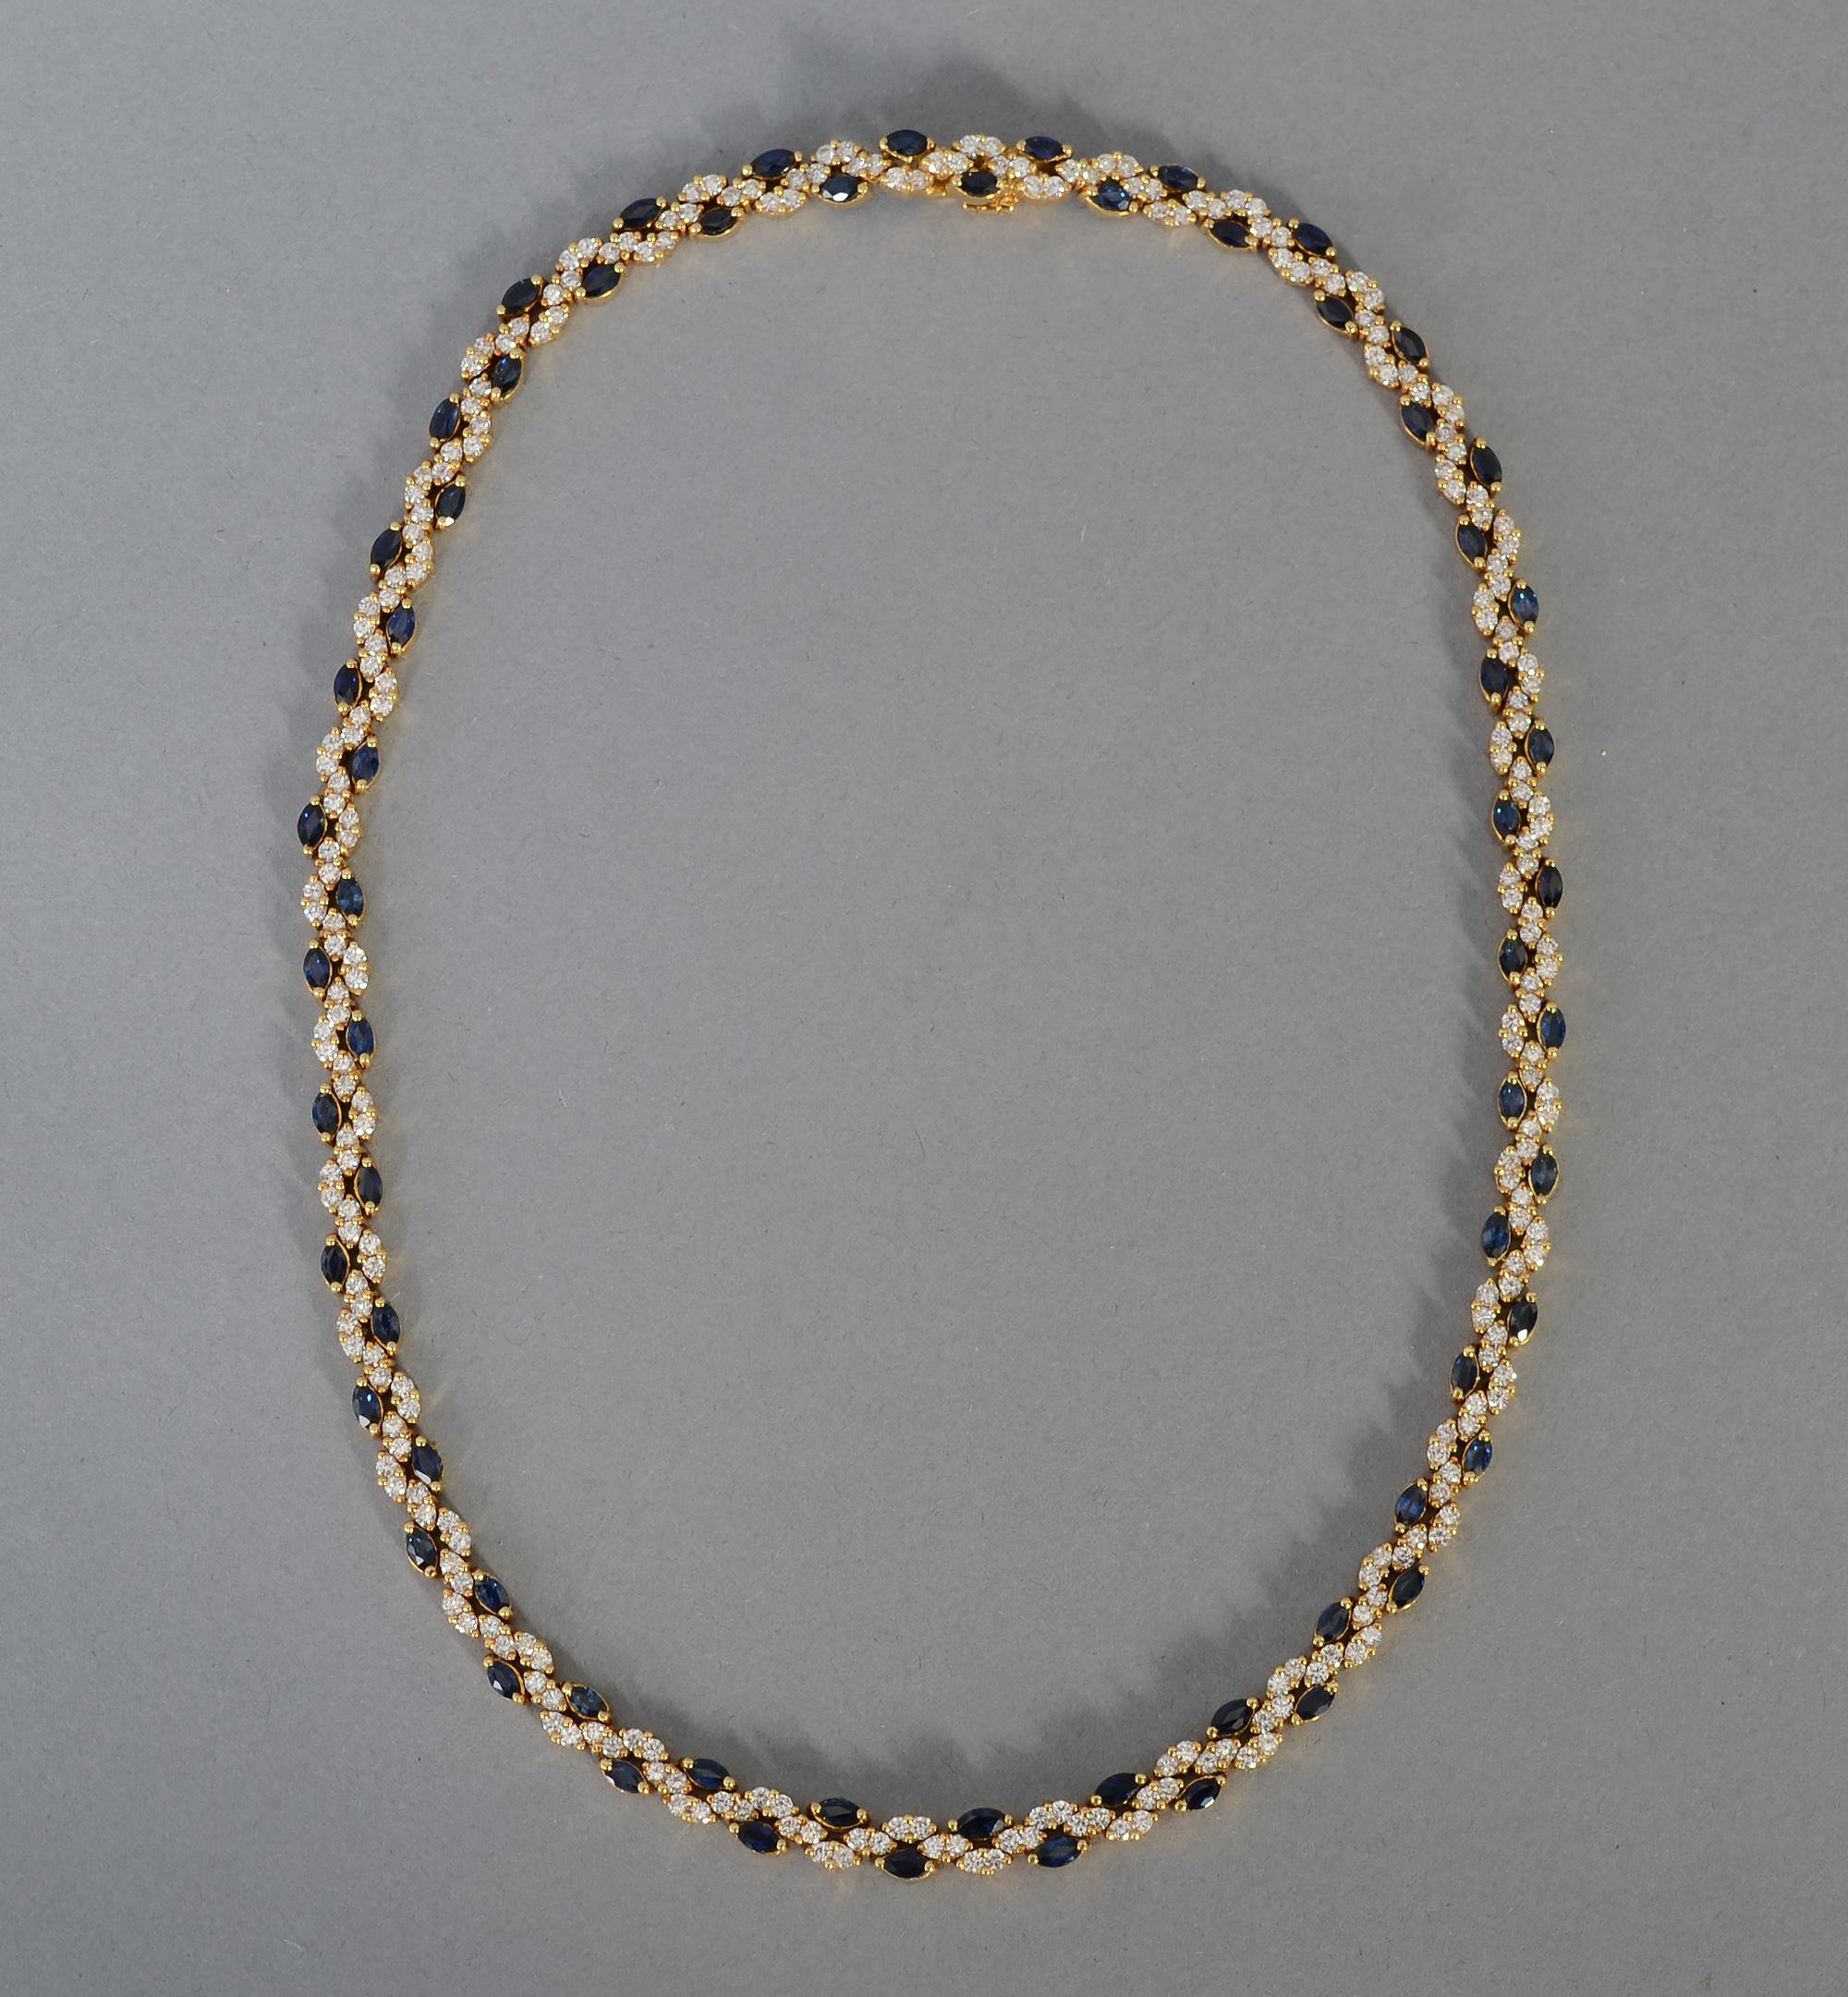 Modern Hammerman Brothers Sapphire and Diamond Choker Necklace For Sale